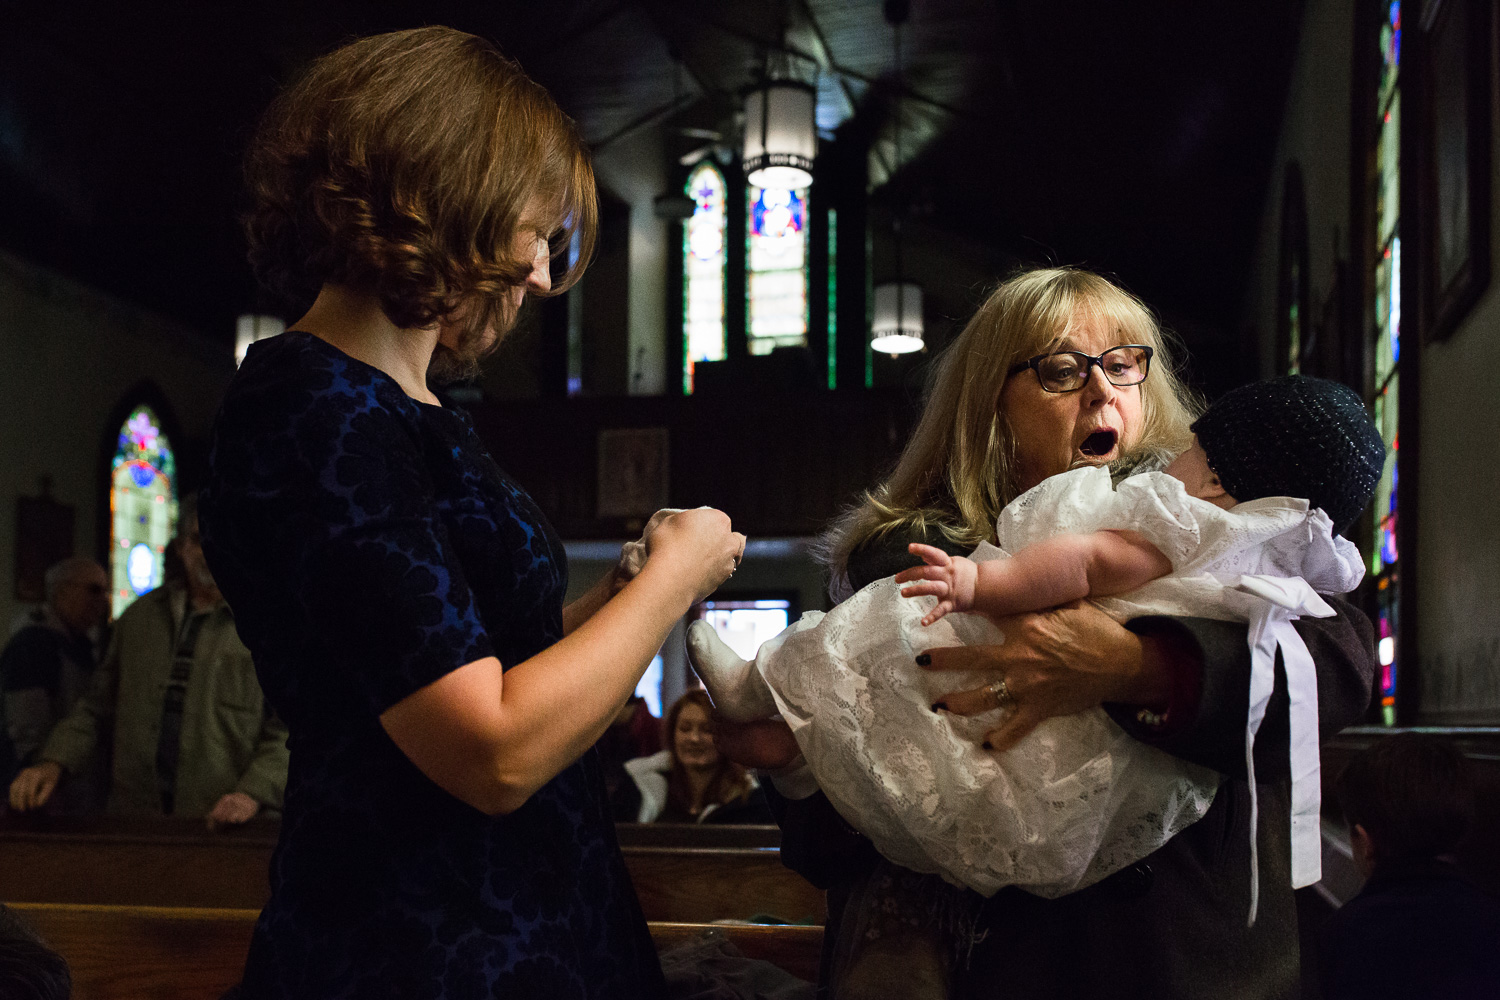 baptism-baby-event-photography-1.jpg